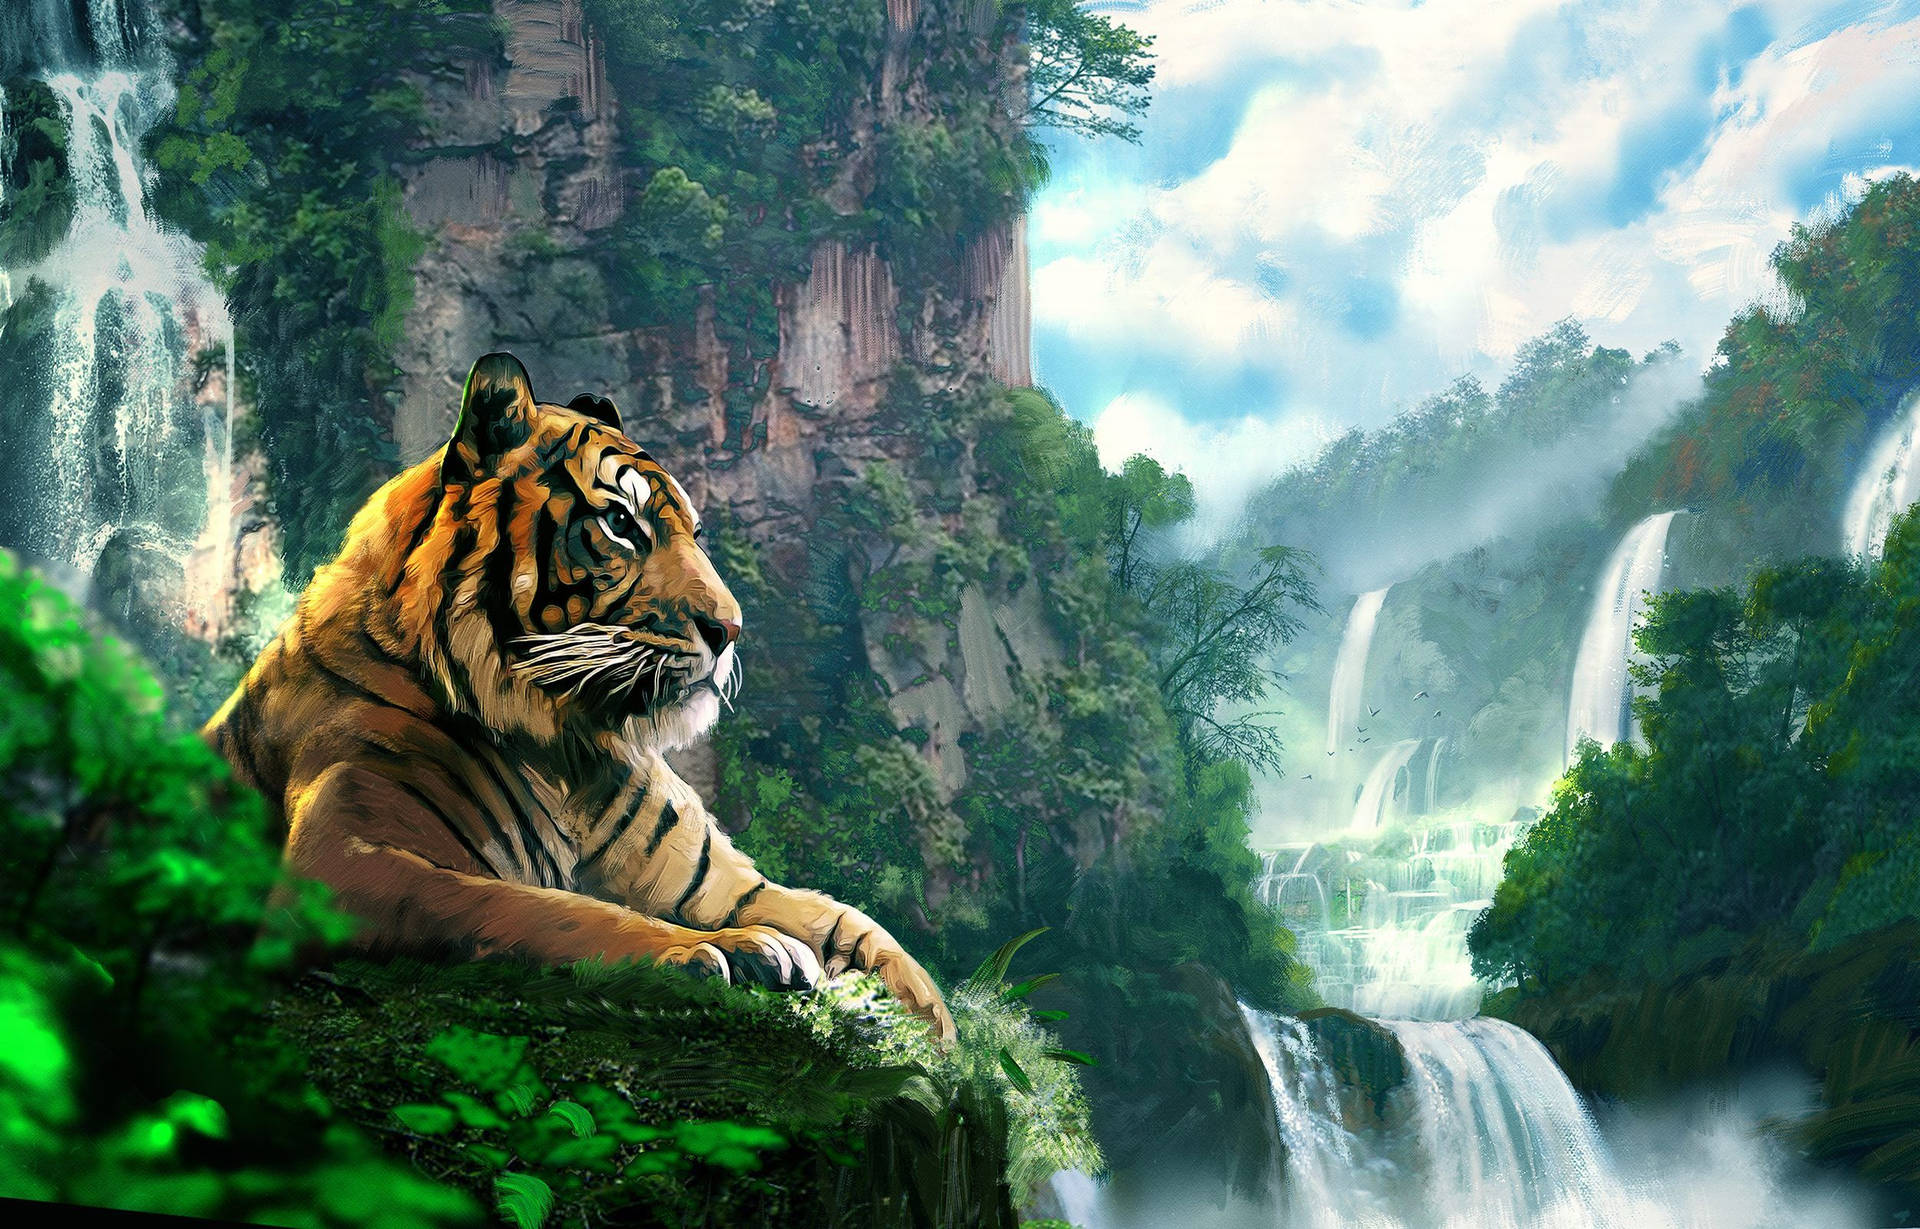 Tiger Near Waterfalls Painting Background